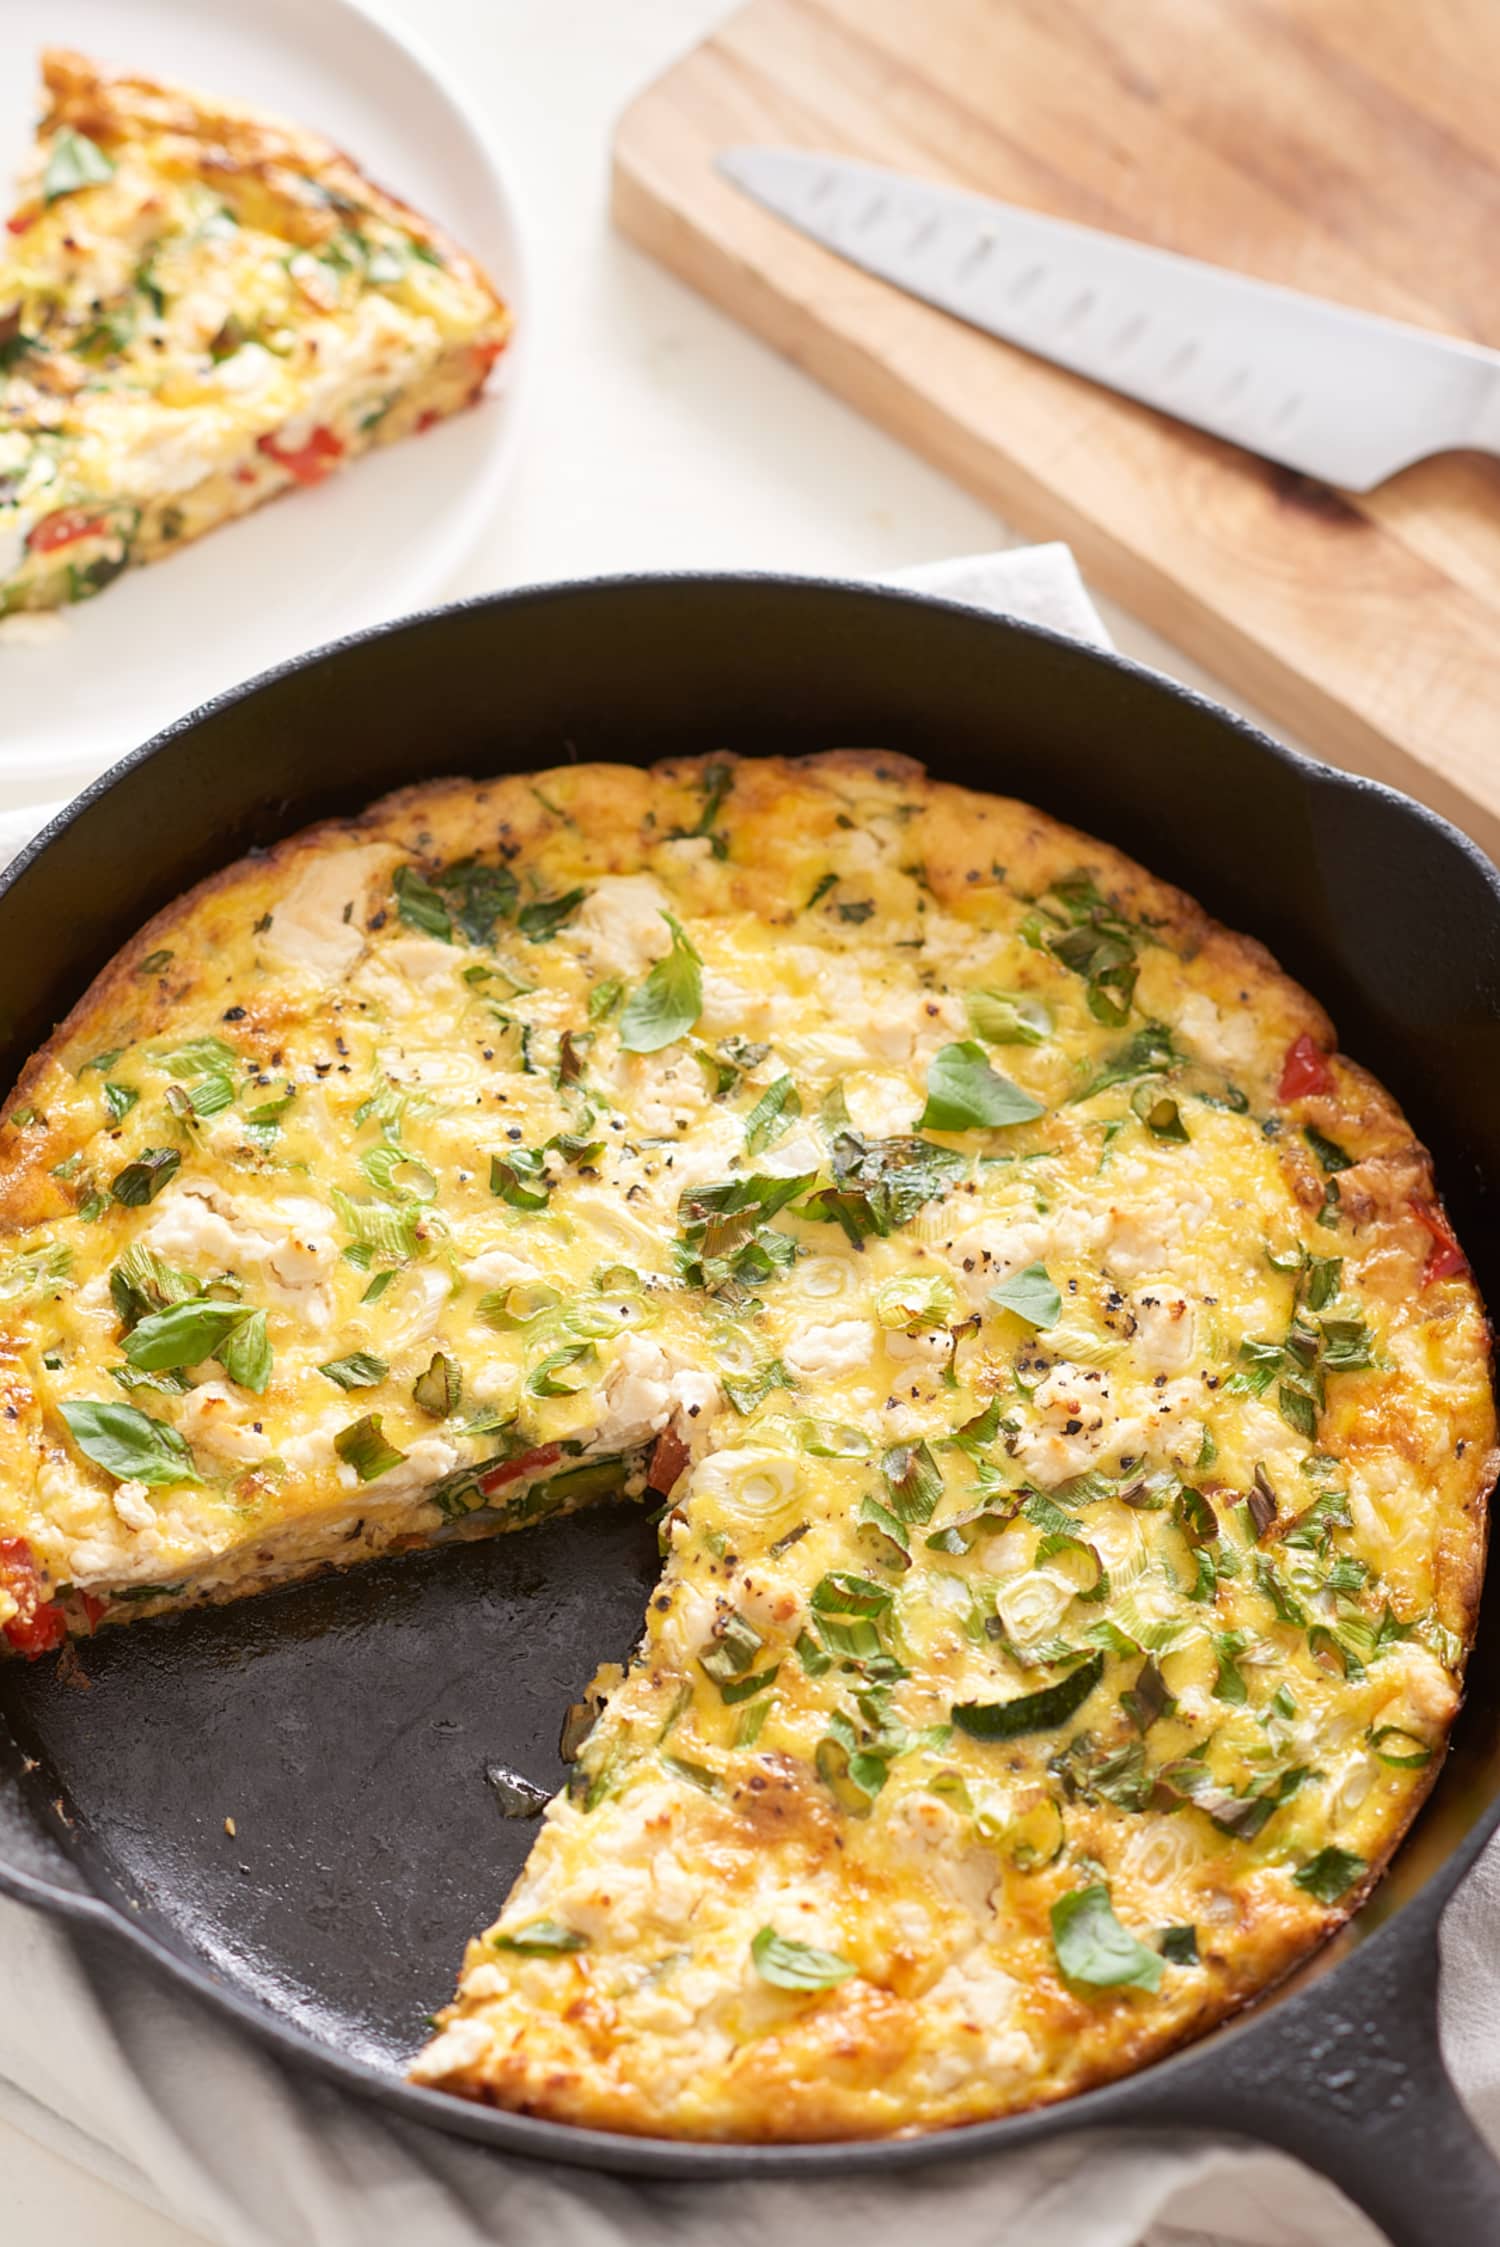 Recipe: The Easiest Cheese and Vegetable Frittata | Kitchn